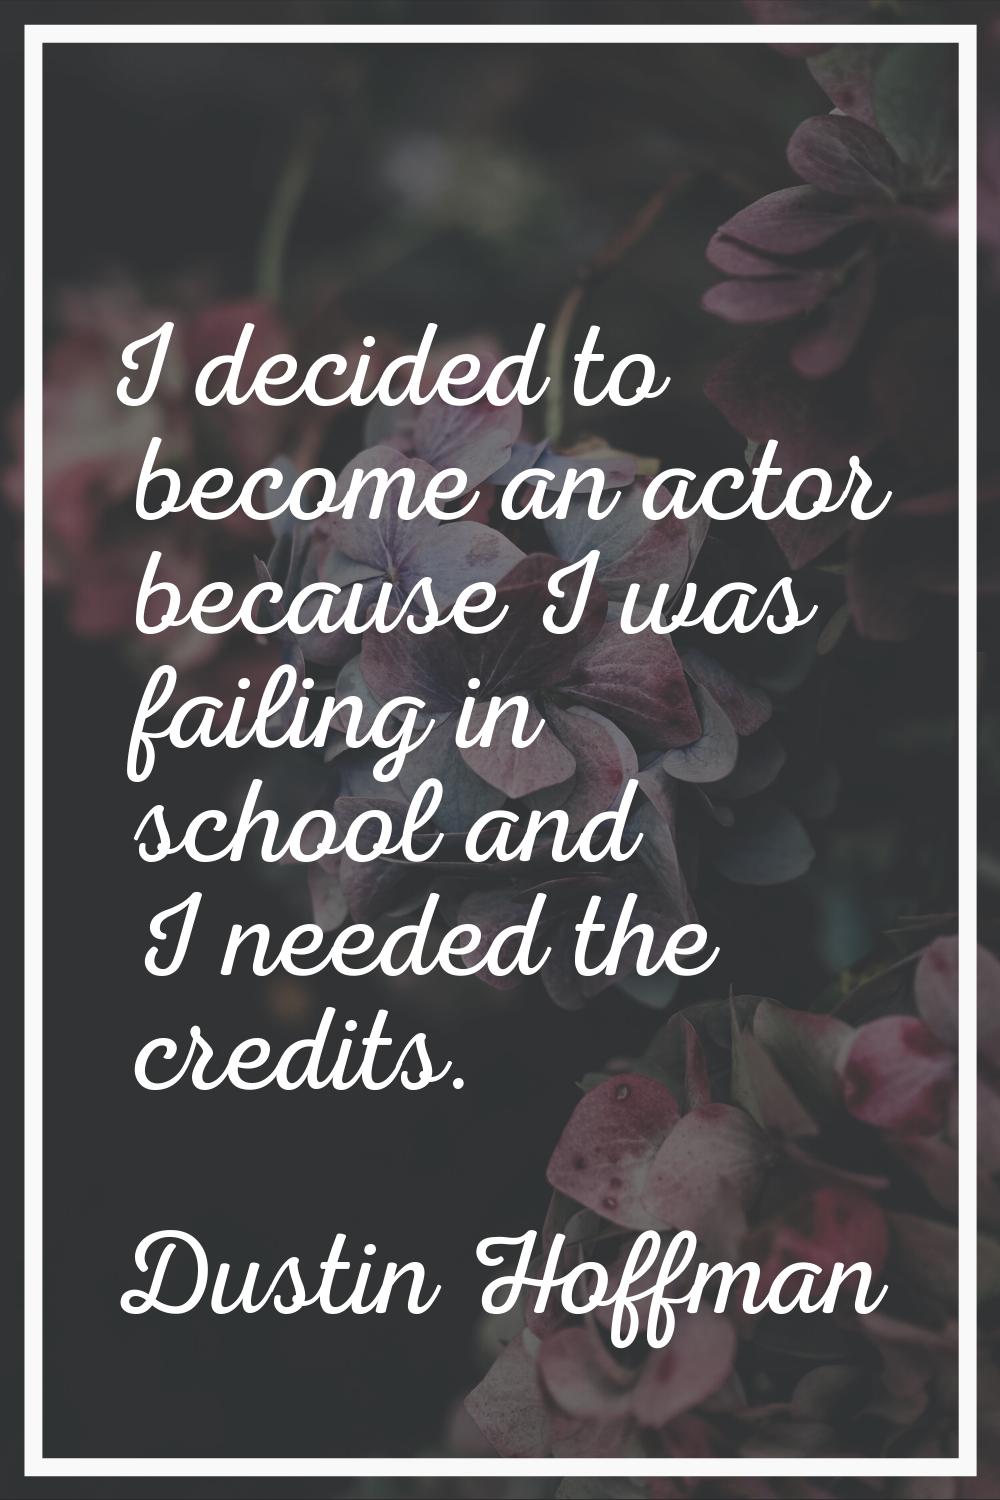 I decided to become an actor because I was failing in school and I needed the credits.